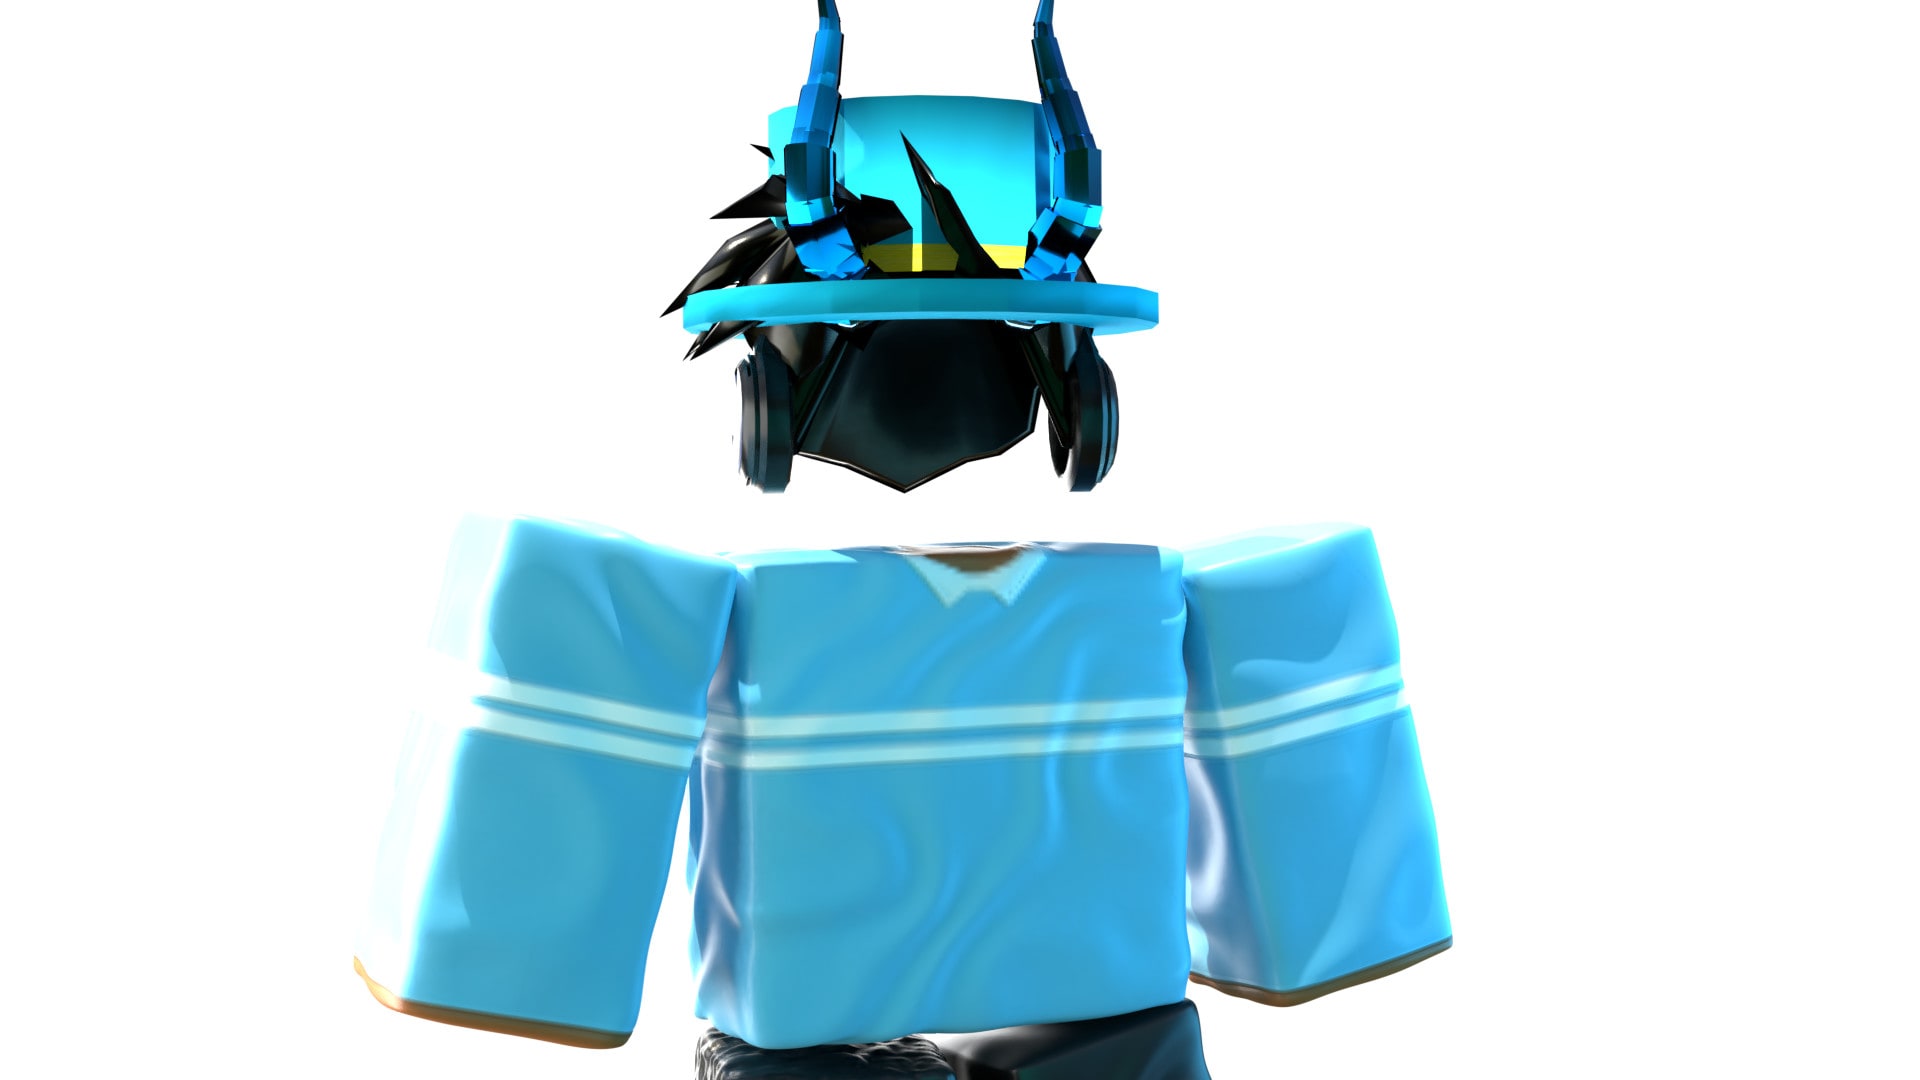 Roblox Avatar Rendering Character, avatar transparent background